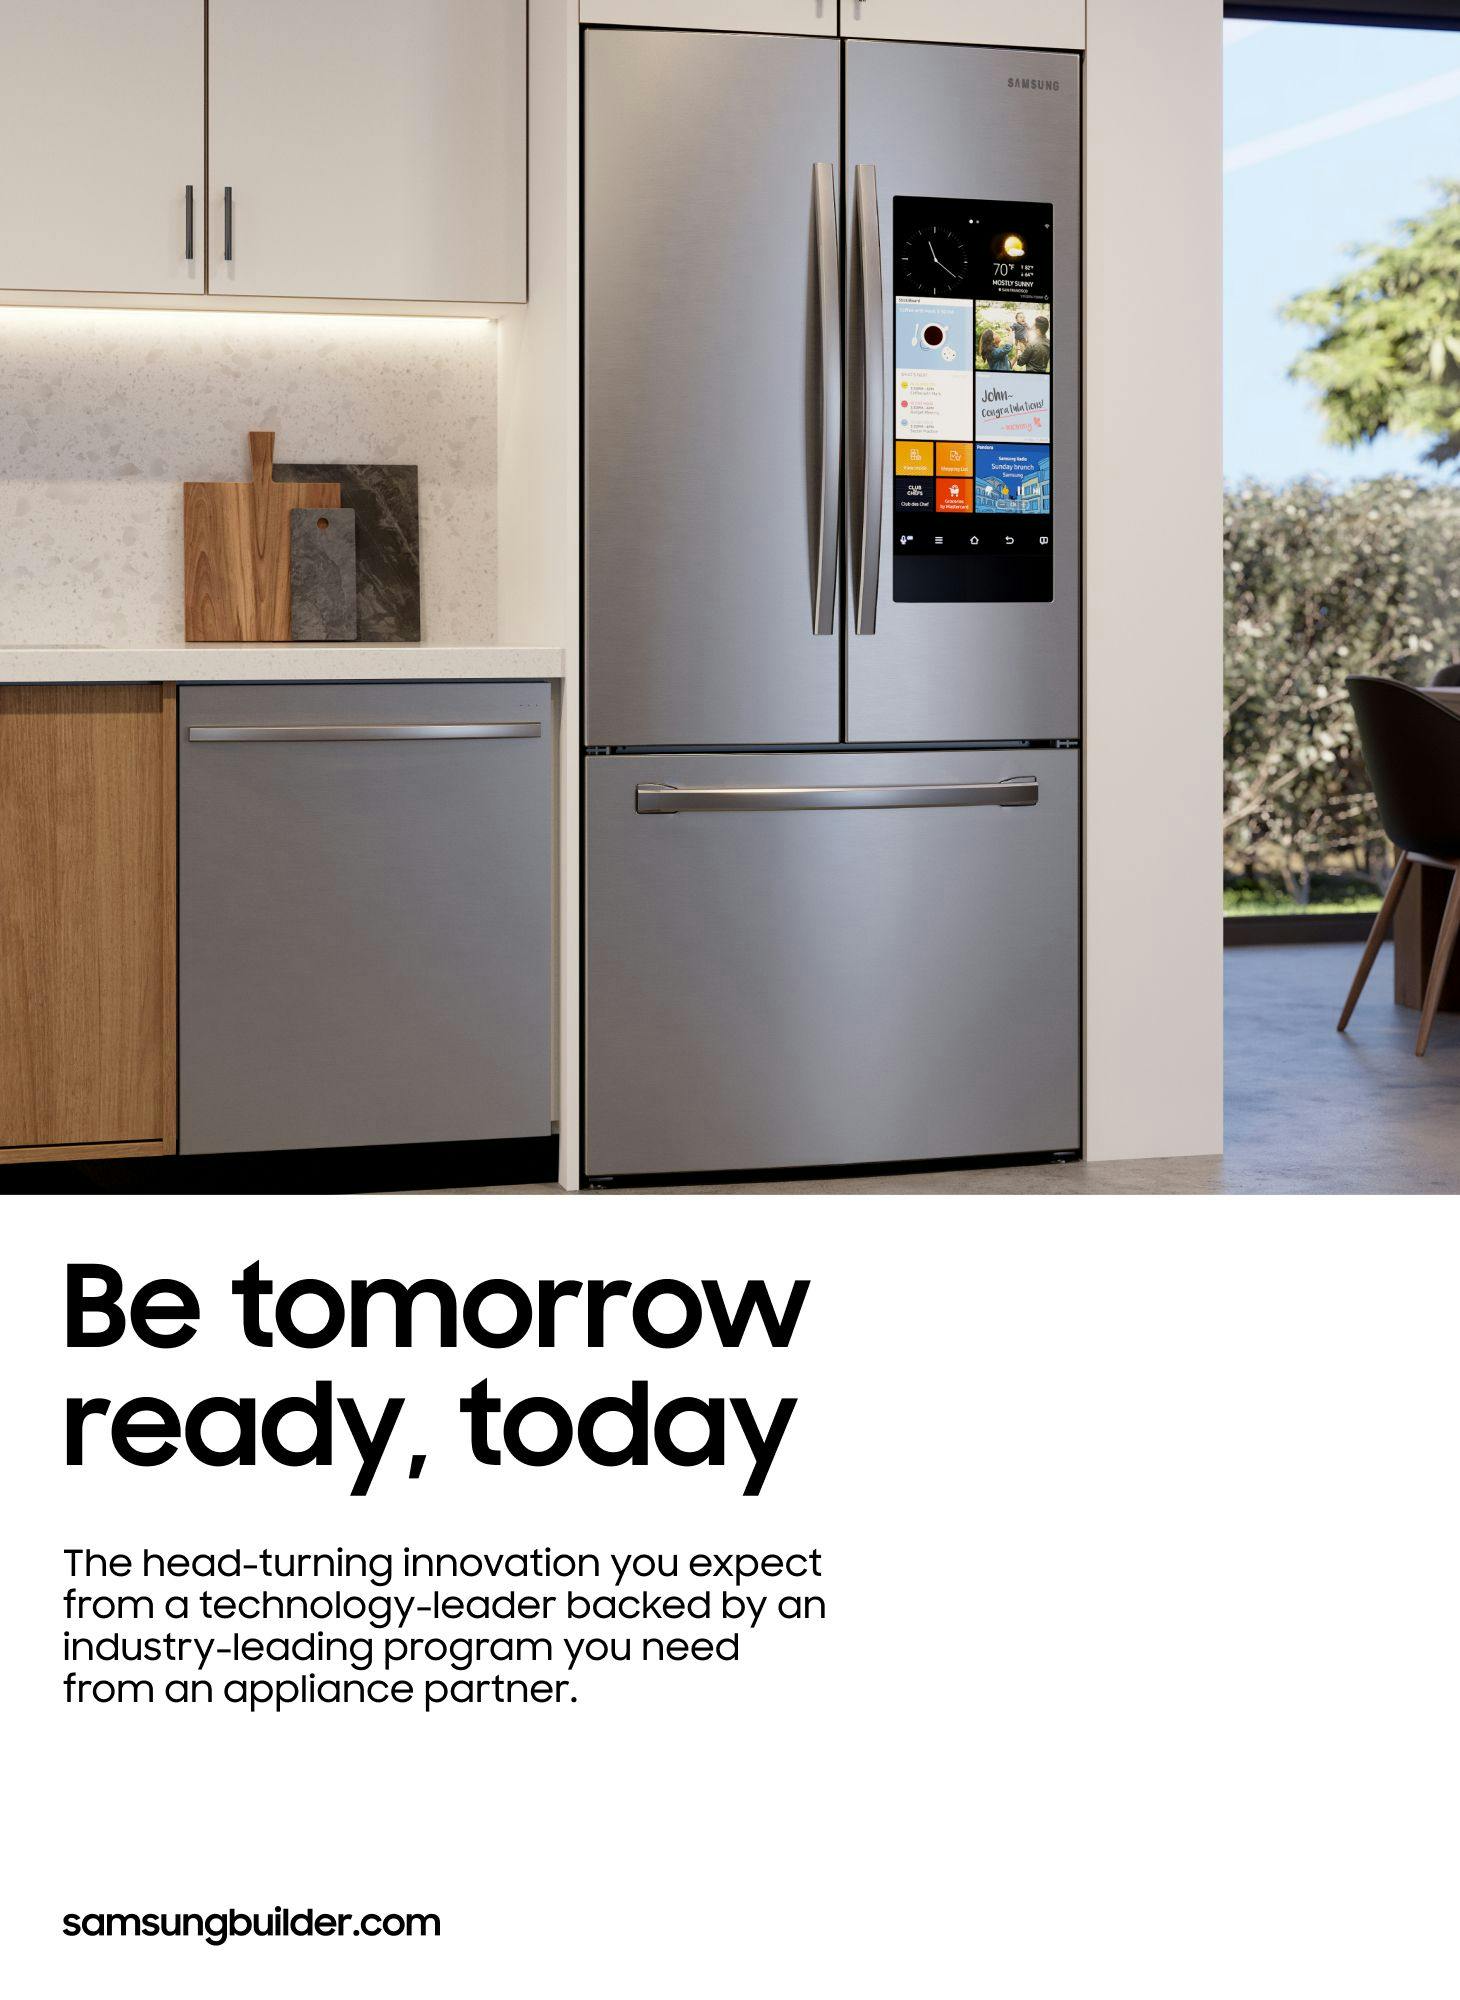 Stainless Steel Smart Fridge and Dishwasher in a Kitchen